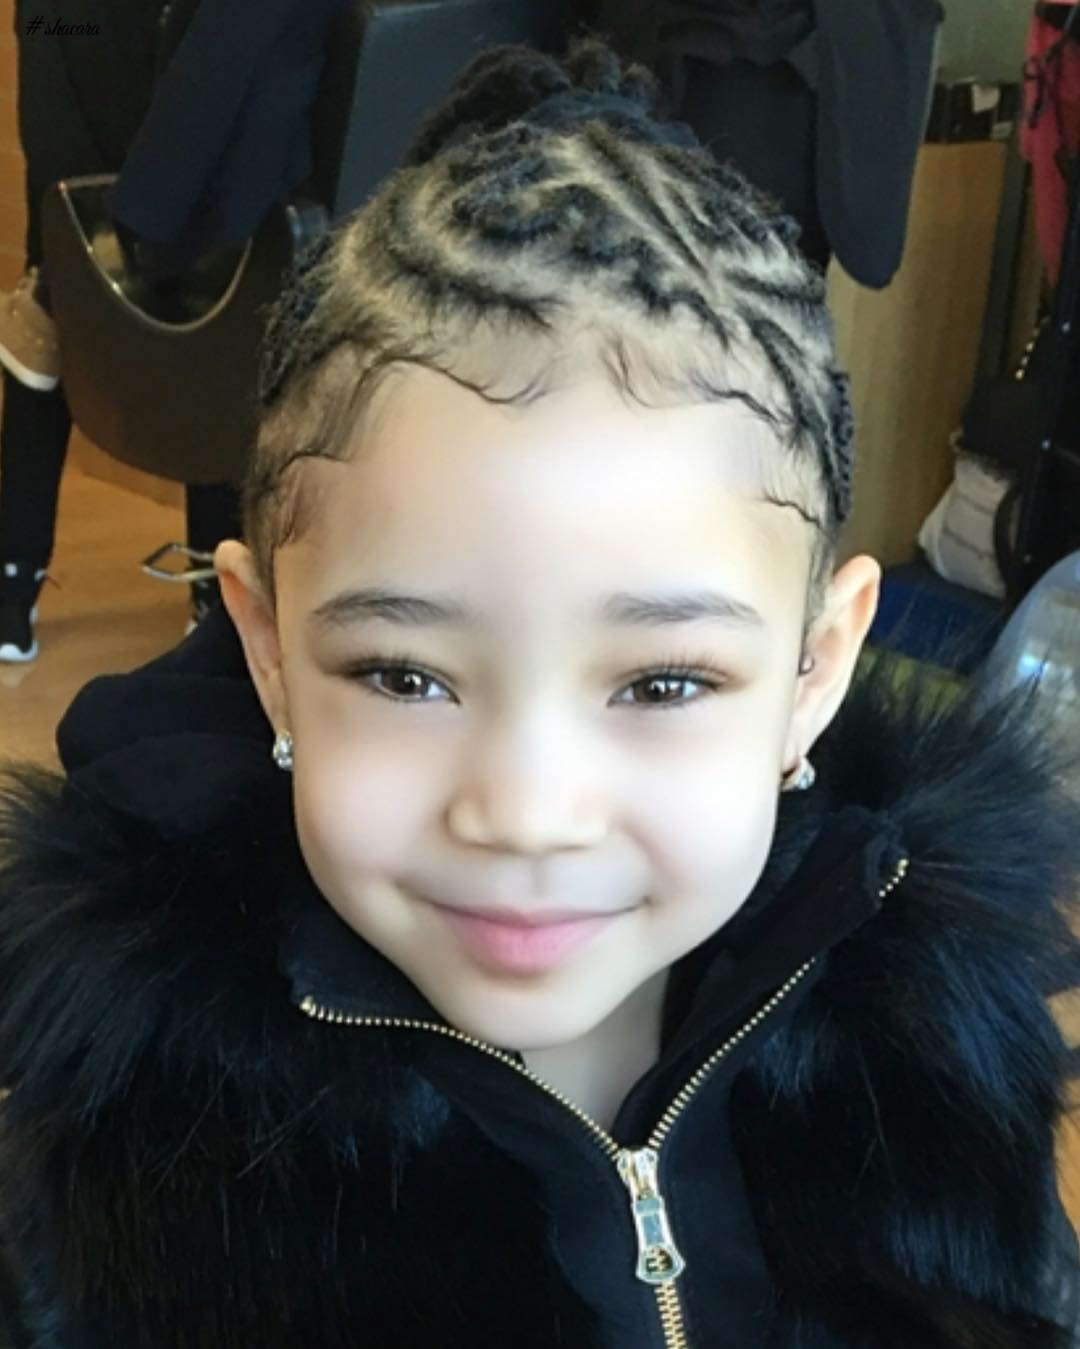 6 KIDDIES’ HAIRSTYLES FOR A MAGICAL LOOK